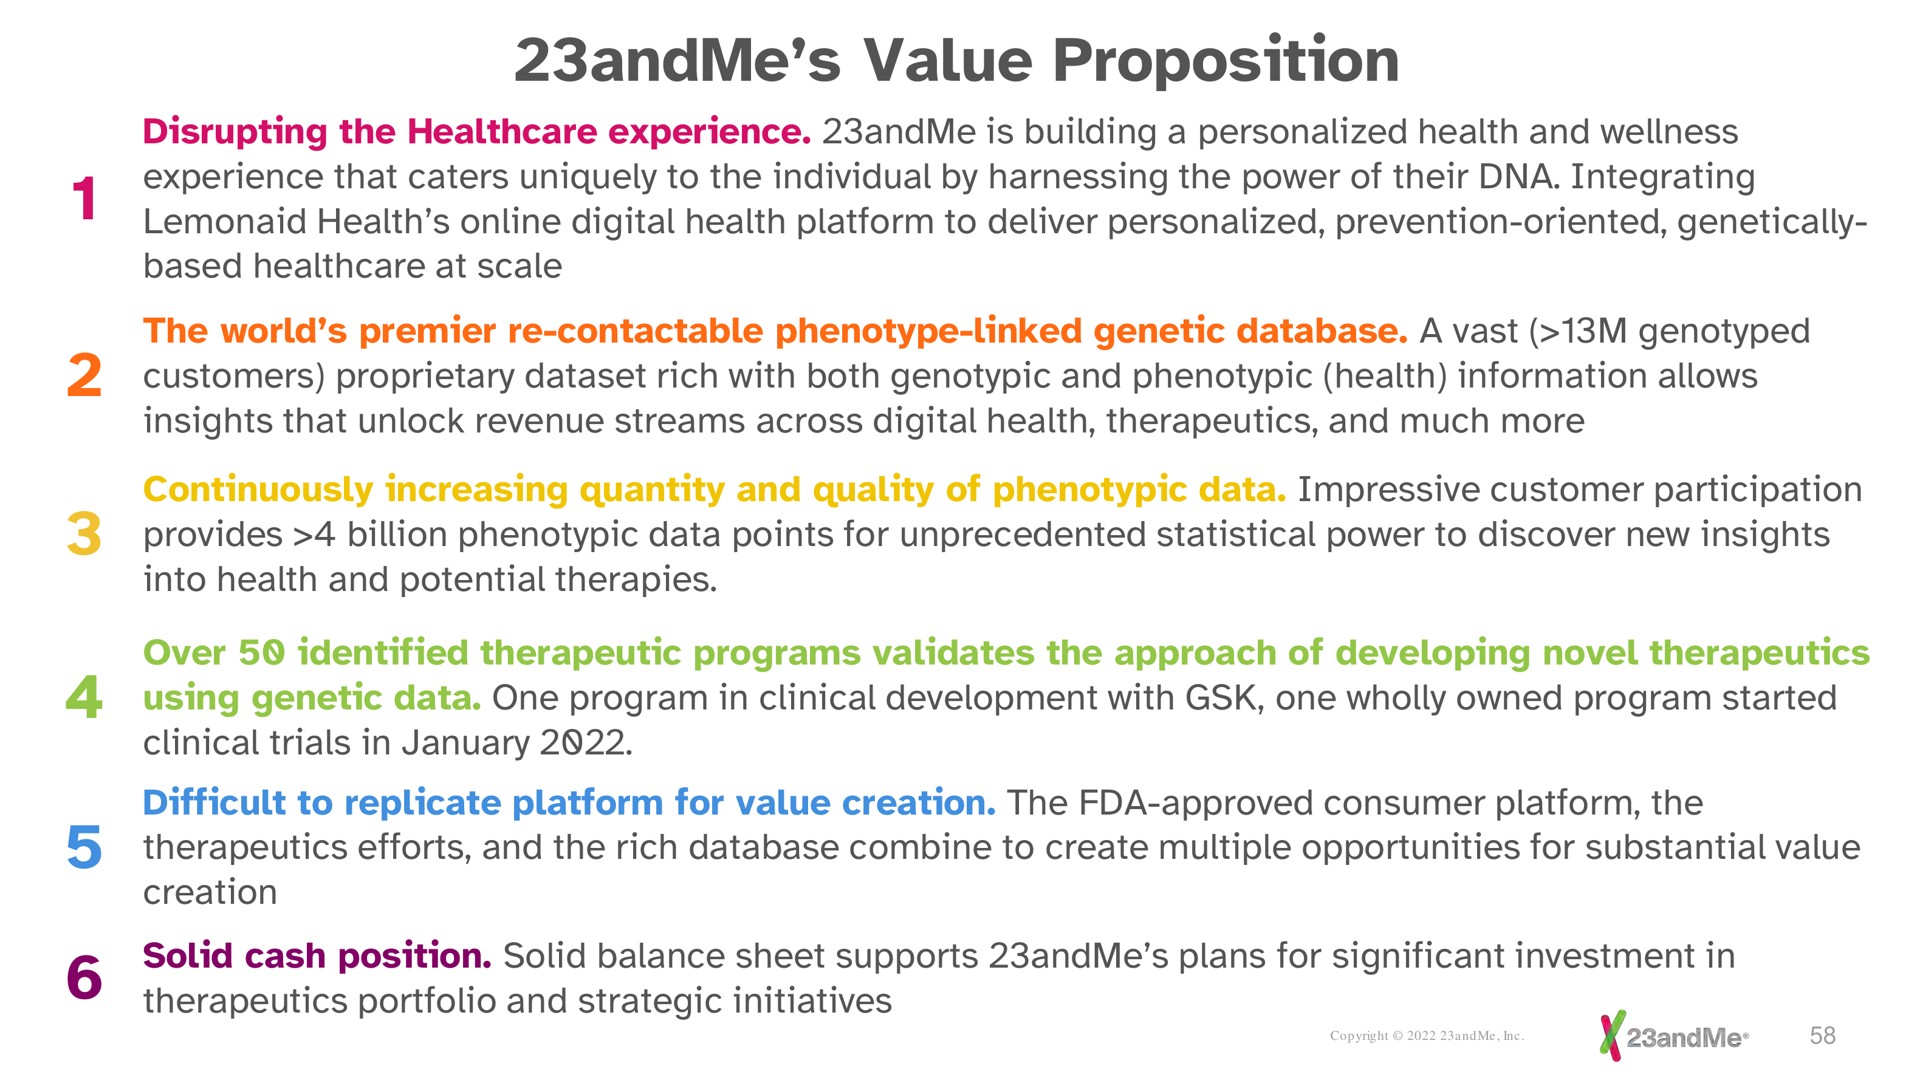 value proposition | 23andMe